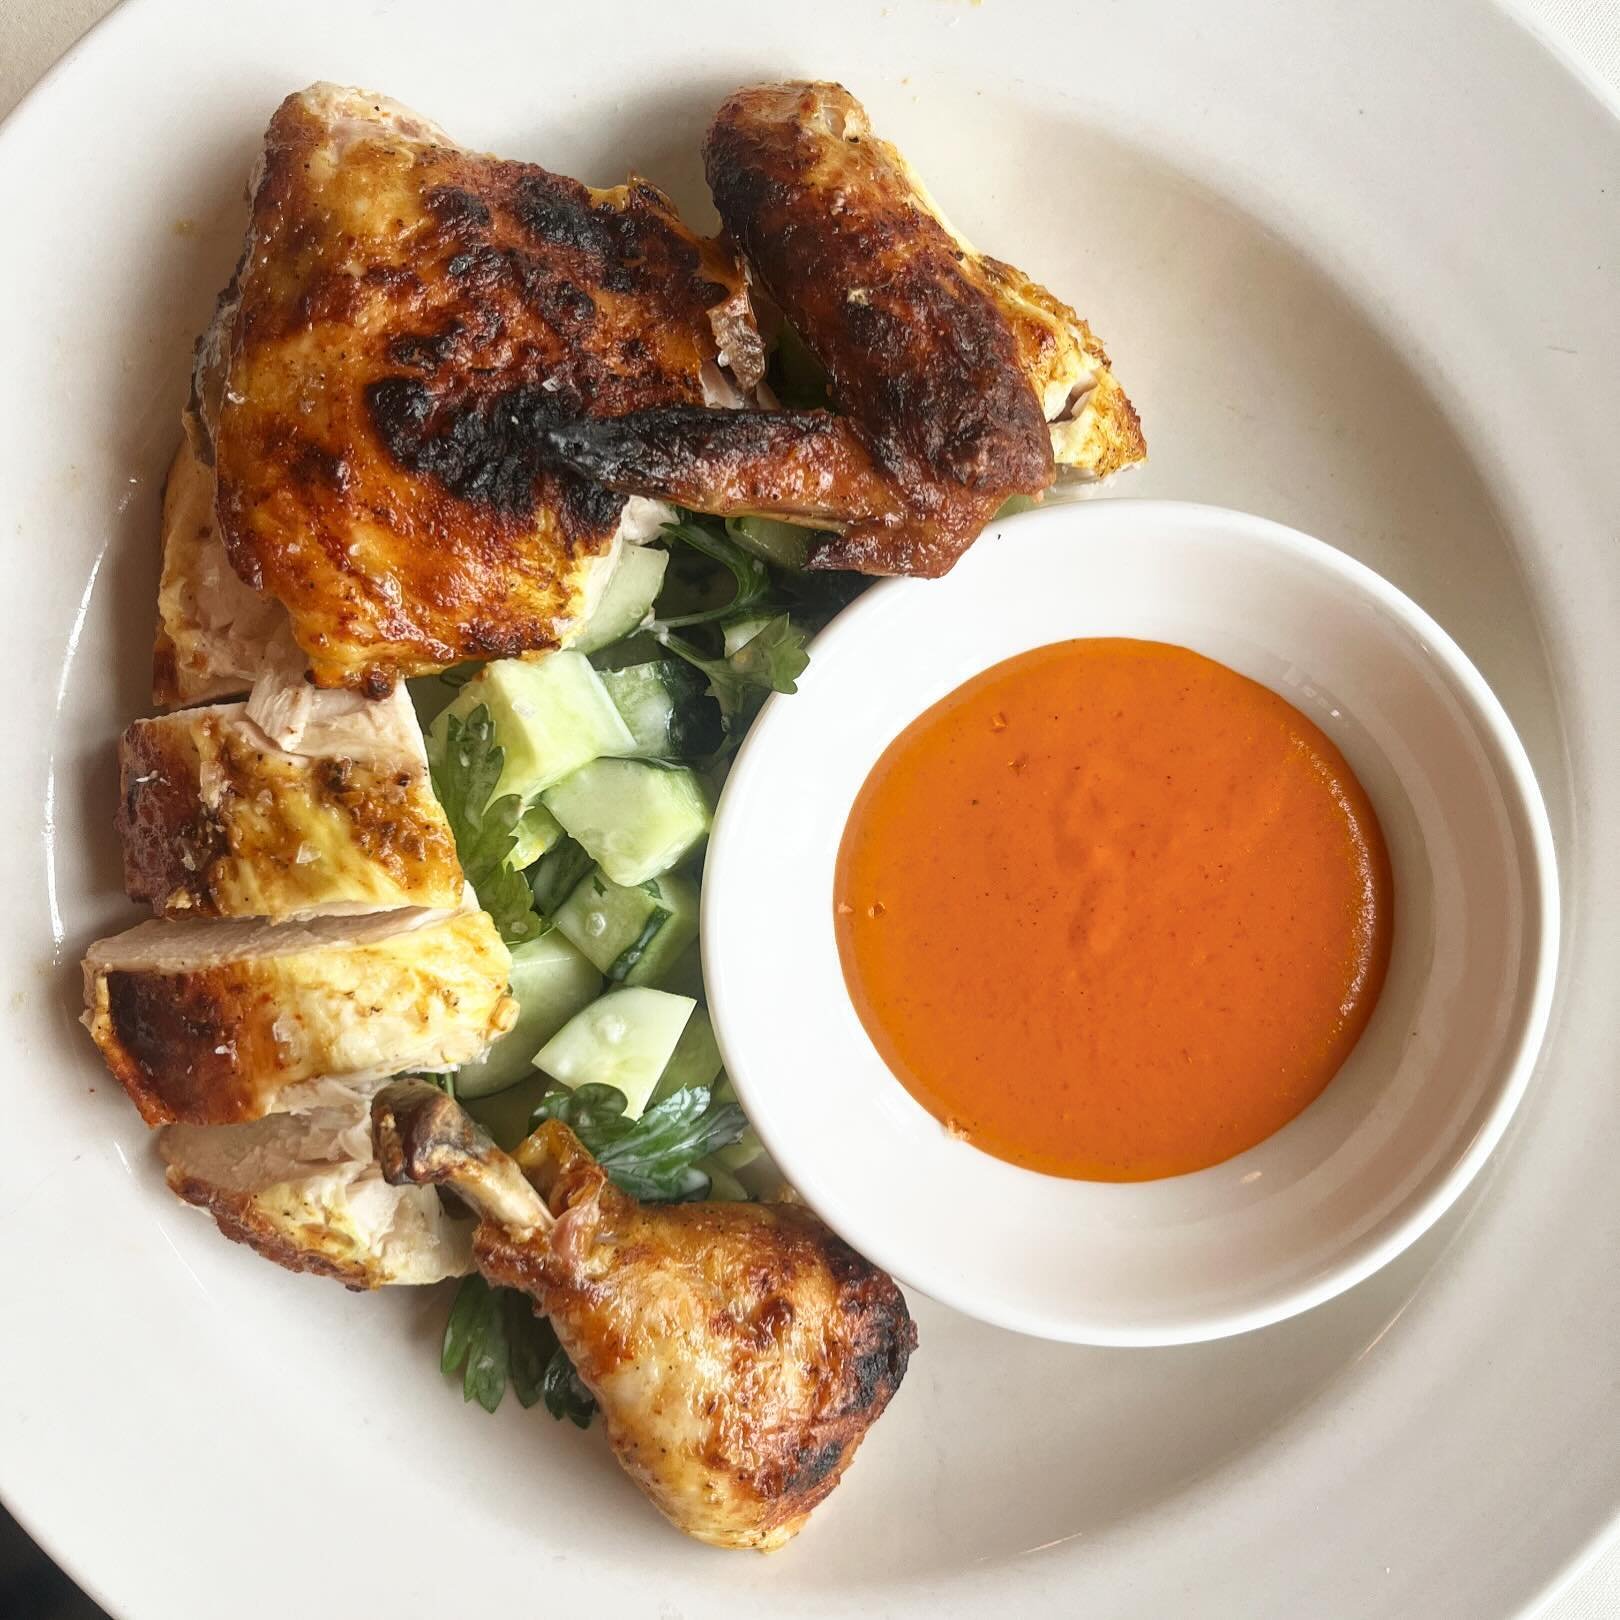 We&rsquo;ve got a newwwww half chicken in the house at Mish Mish and it&rsquo;s sosososo good bc it&rsquo;s brined in buttermilk and Moroccan spices, grilled over charcoal, and served with a simple herby cucumber salad. Hot sauce on the side for a ki